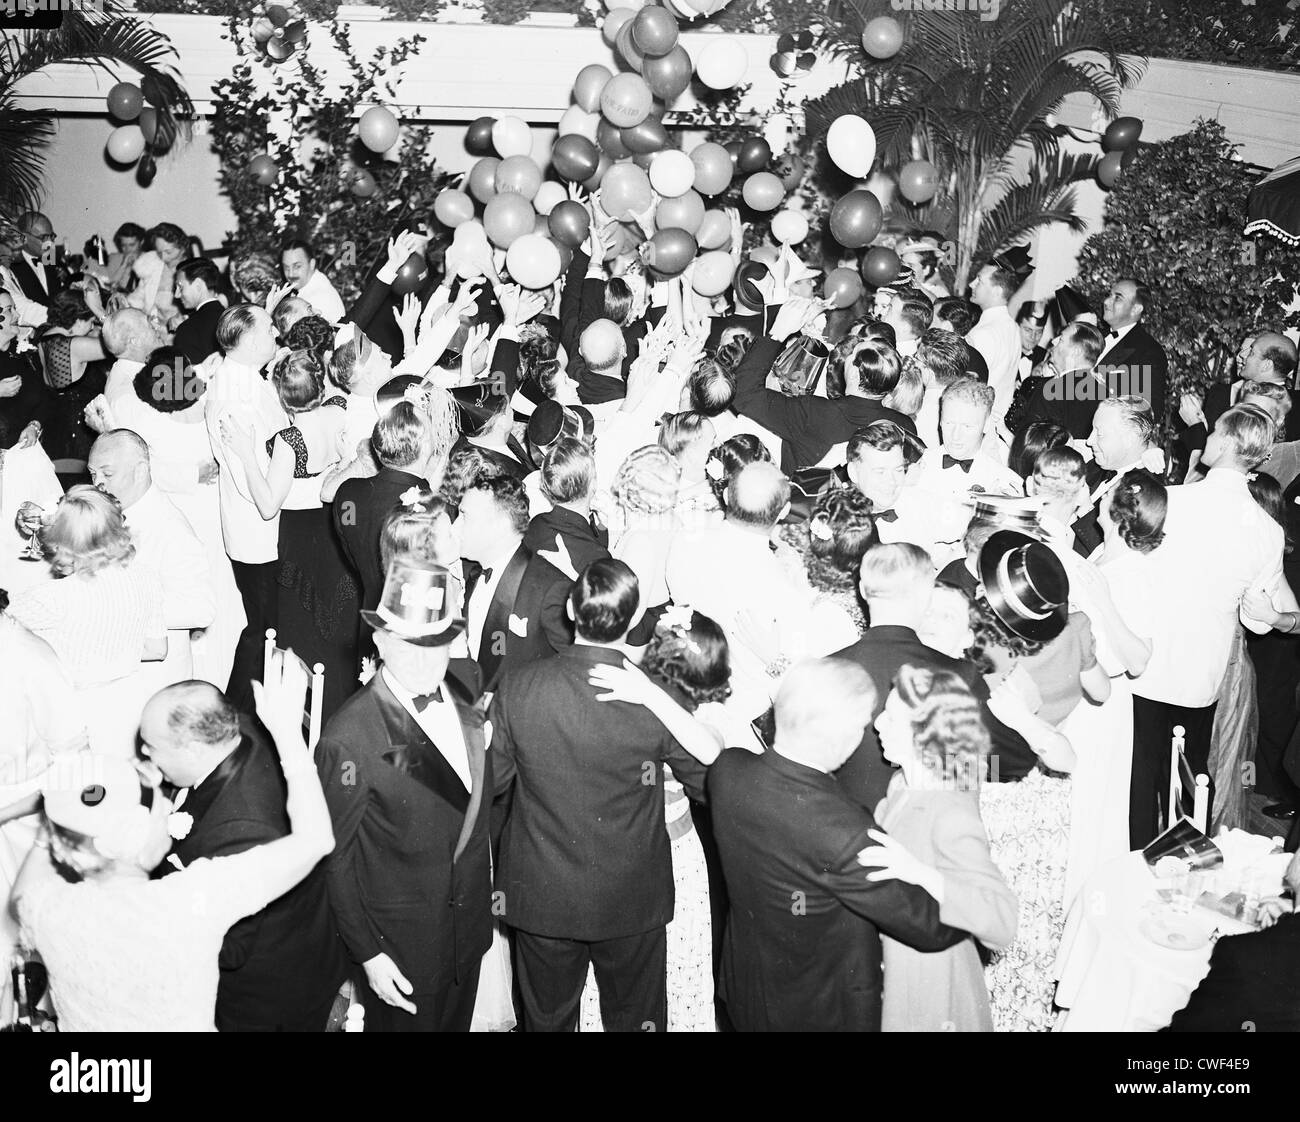 Revelers trying to catch balloons falling from the ceiling on New Year's Eve at The Patio, Palm Beach, Florida, December 31,1941 Stock Photo